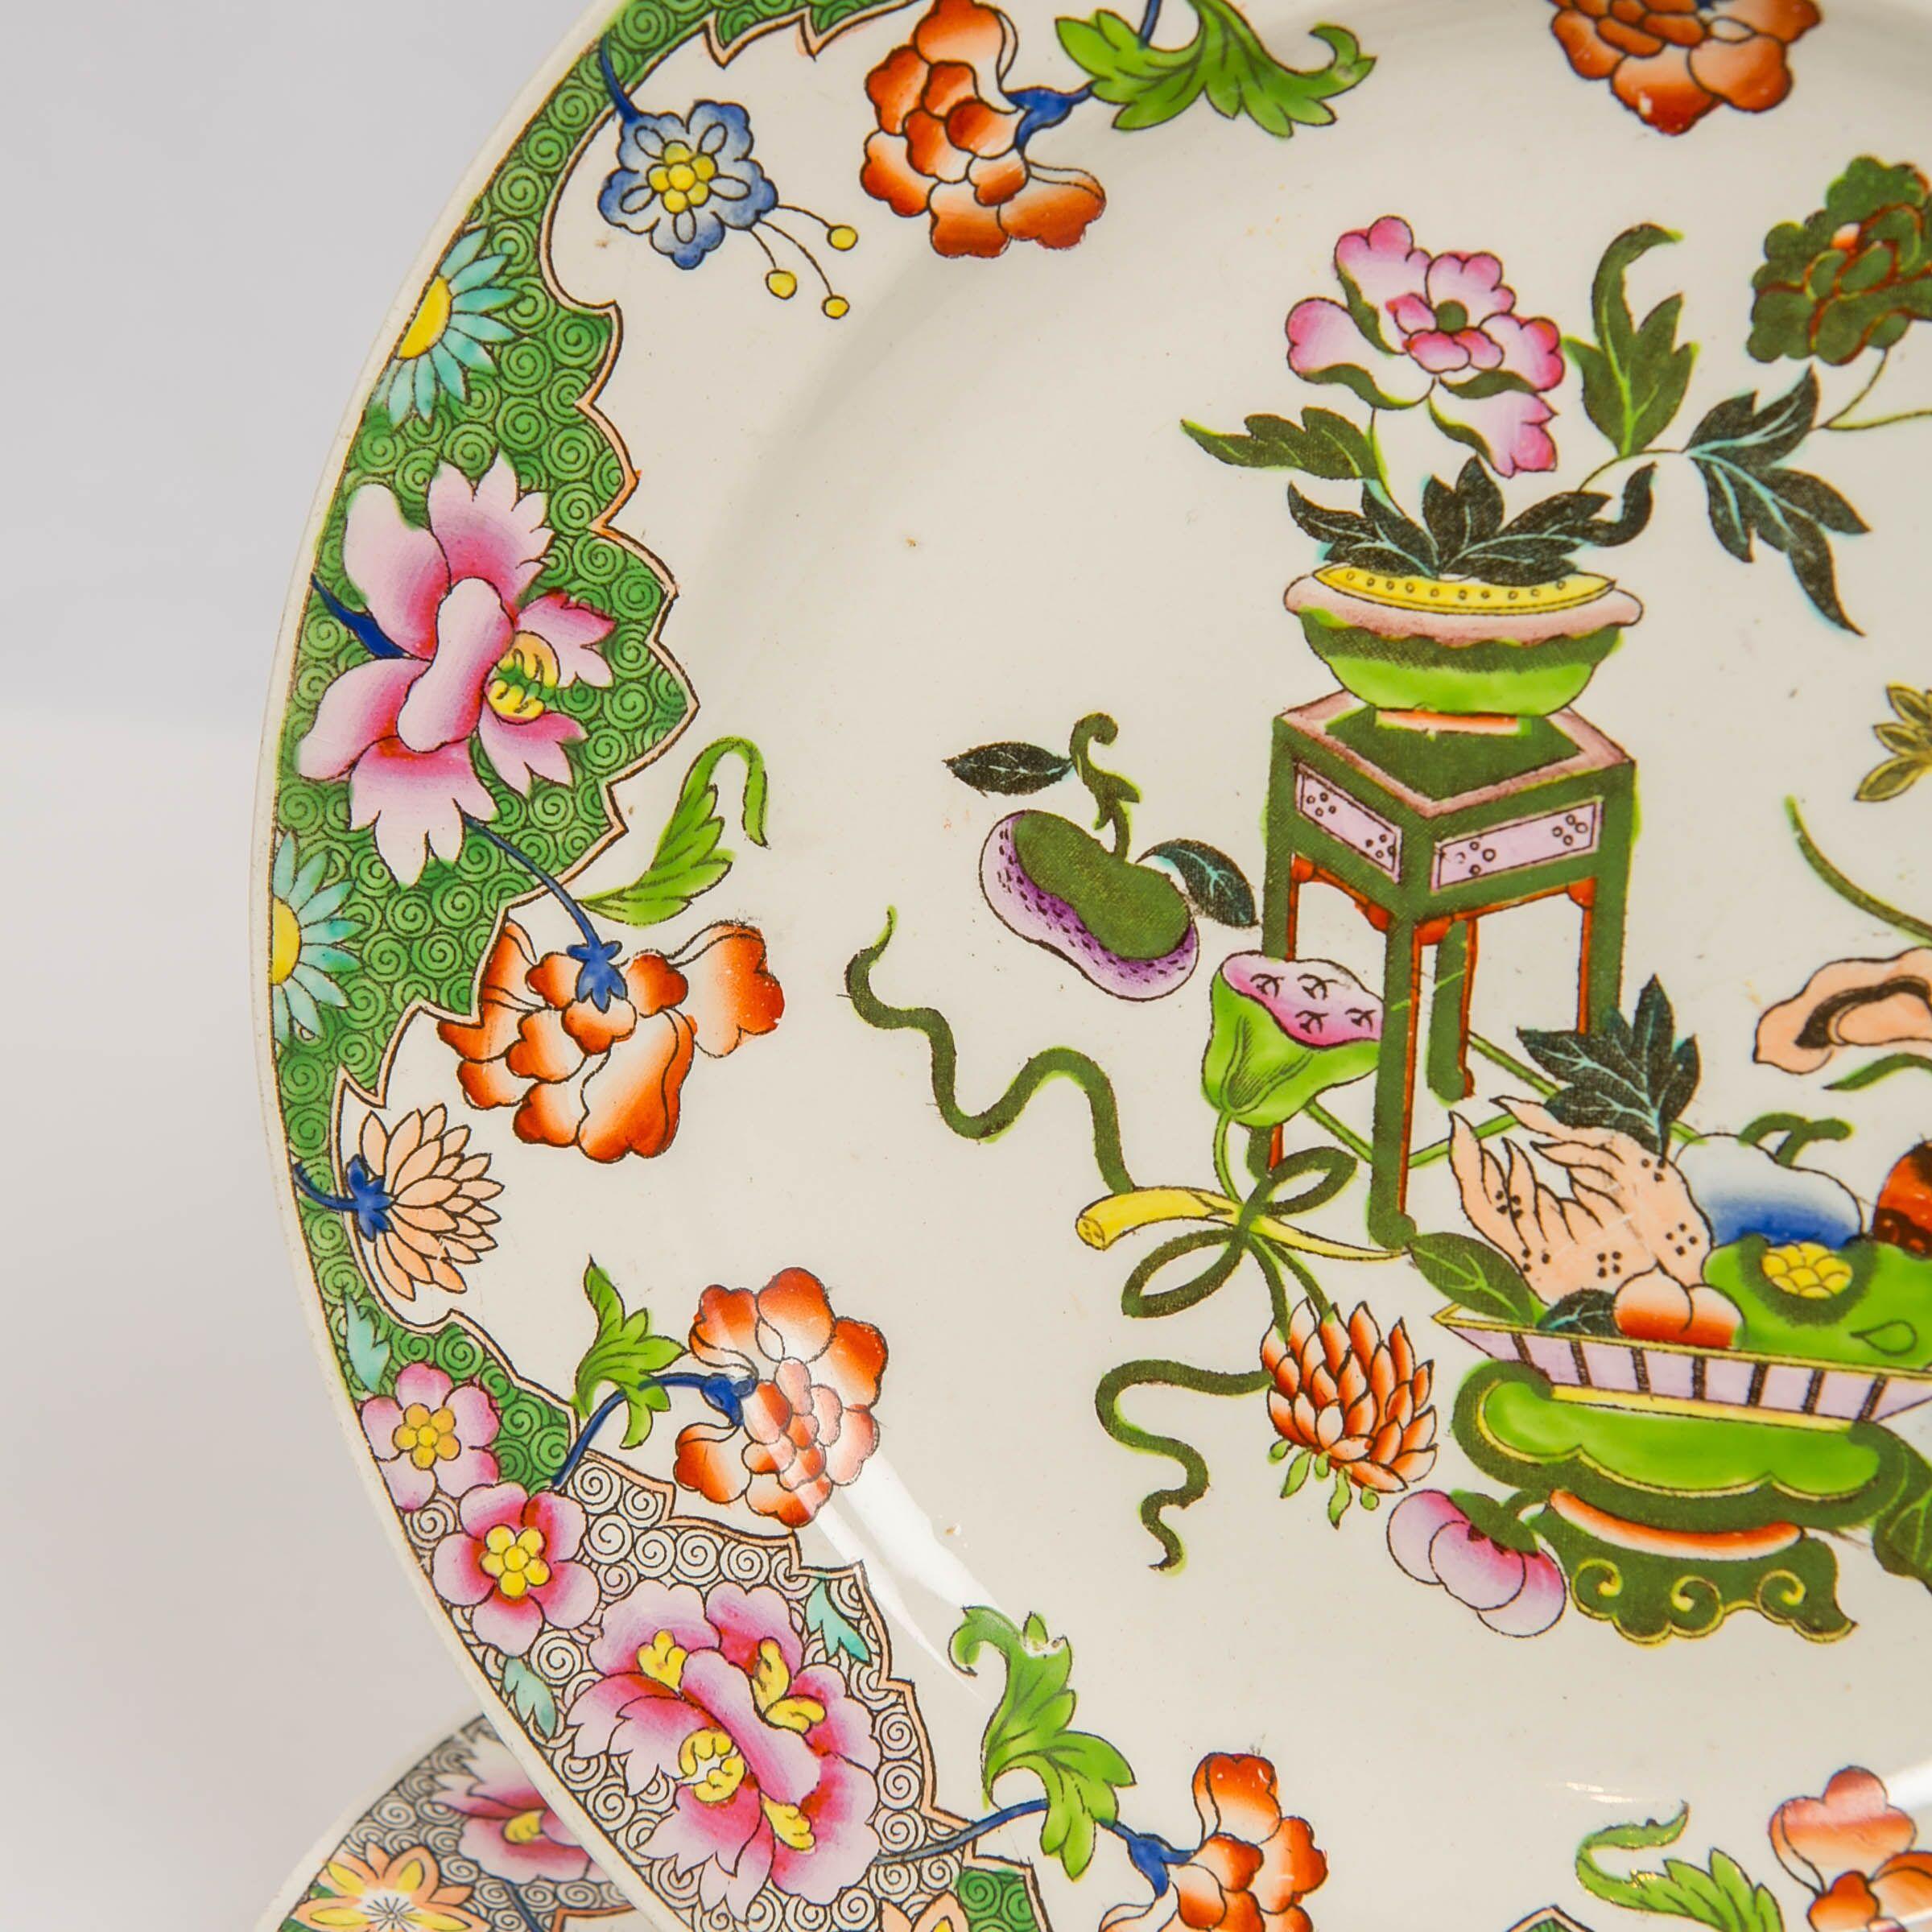 Glazed Set Ten Pearlware Plates with Chinoiserie Decoration Made England, circa 1820